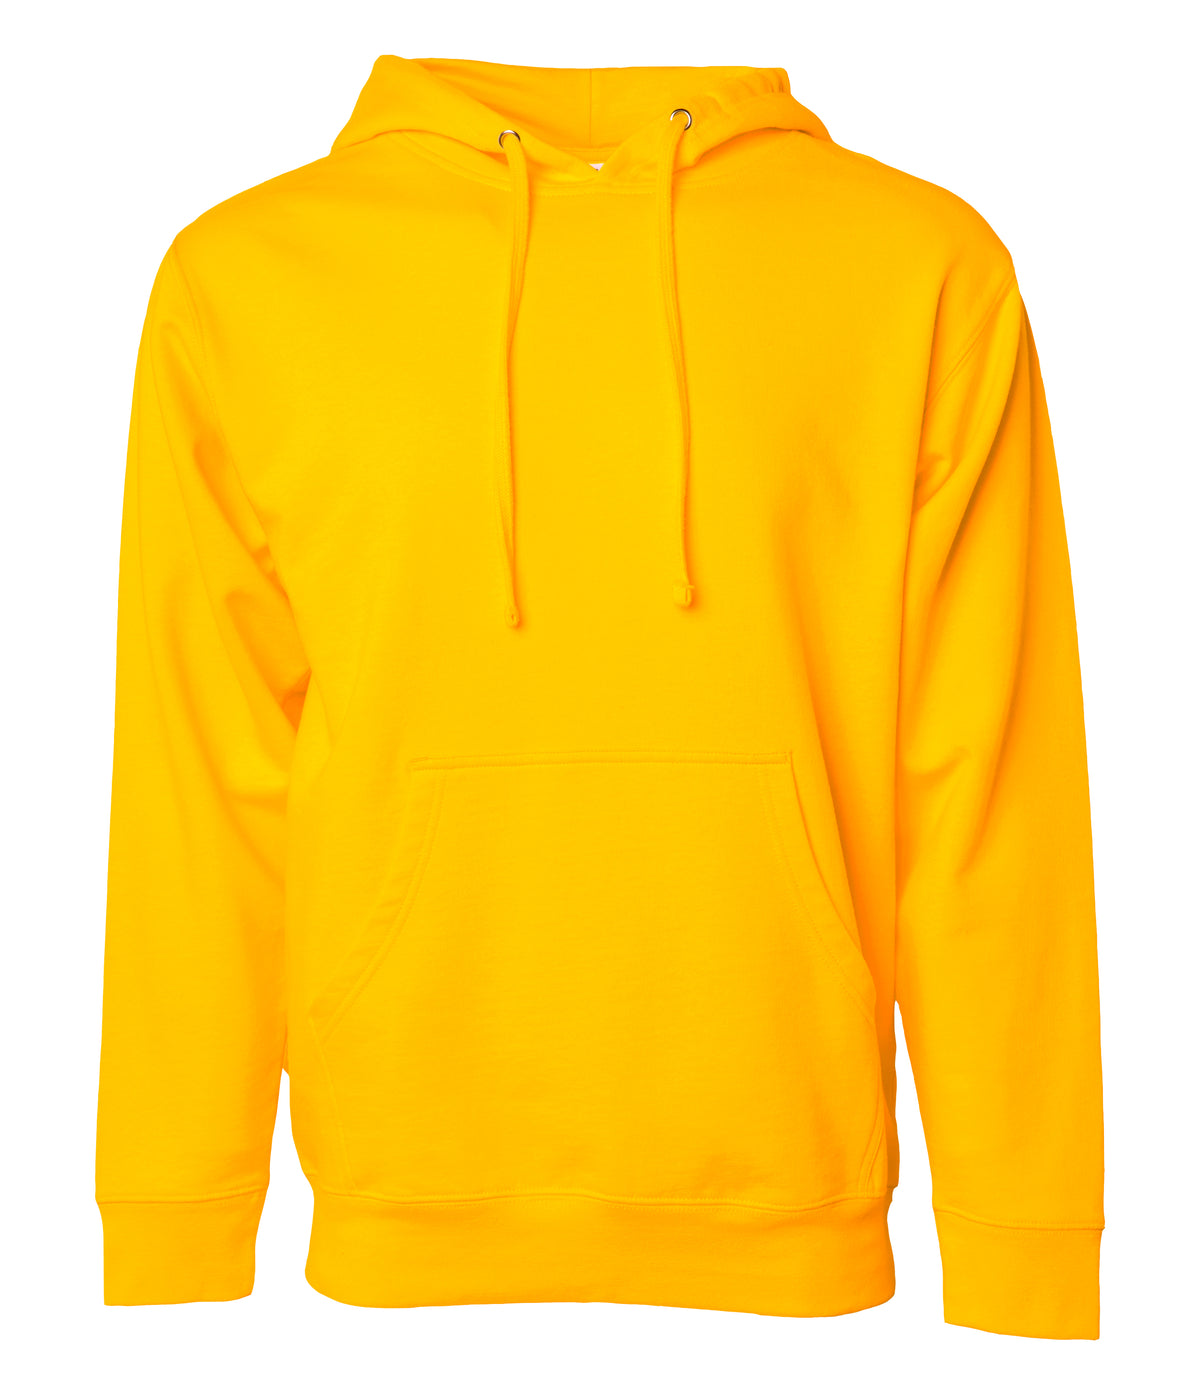 4XL & 5XL Midweight Hooded Pullover | SS4500 | Independent Trading Co ...